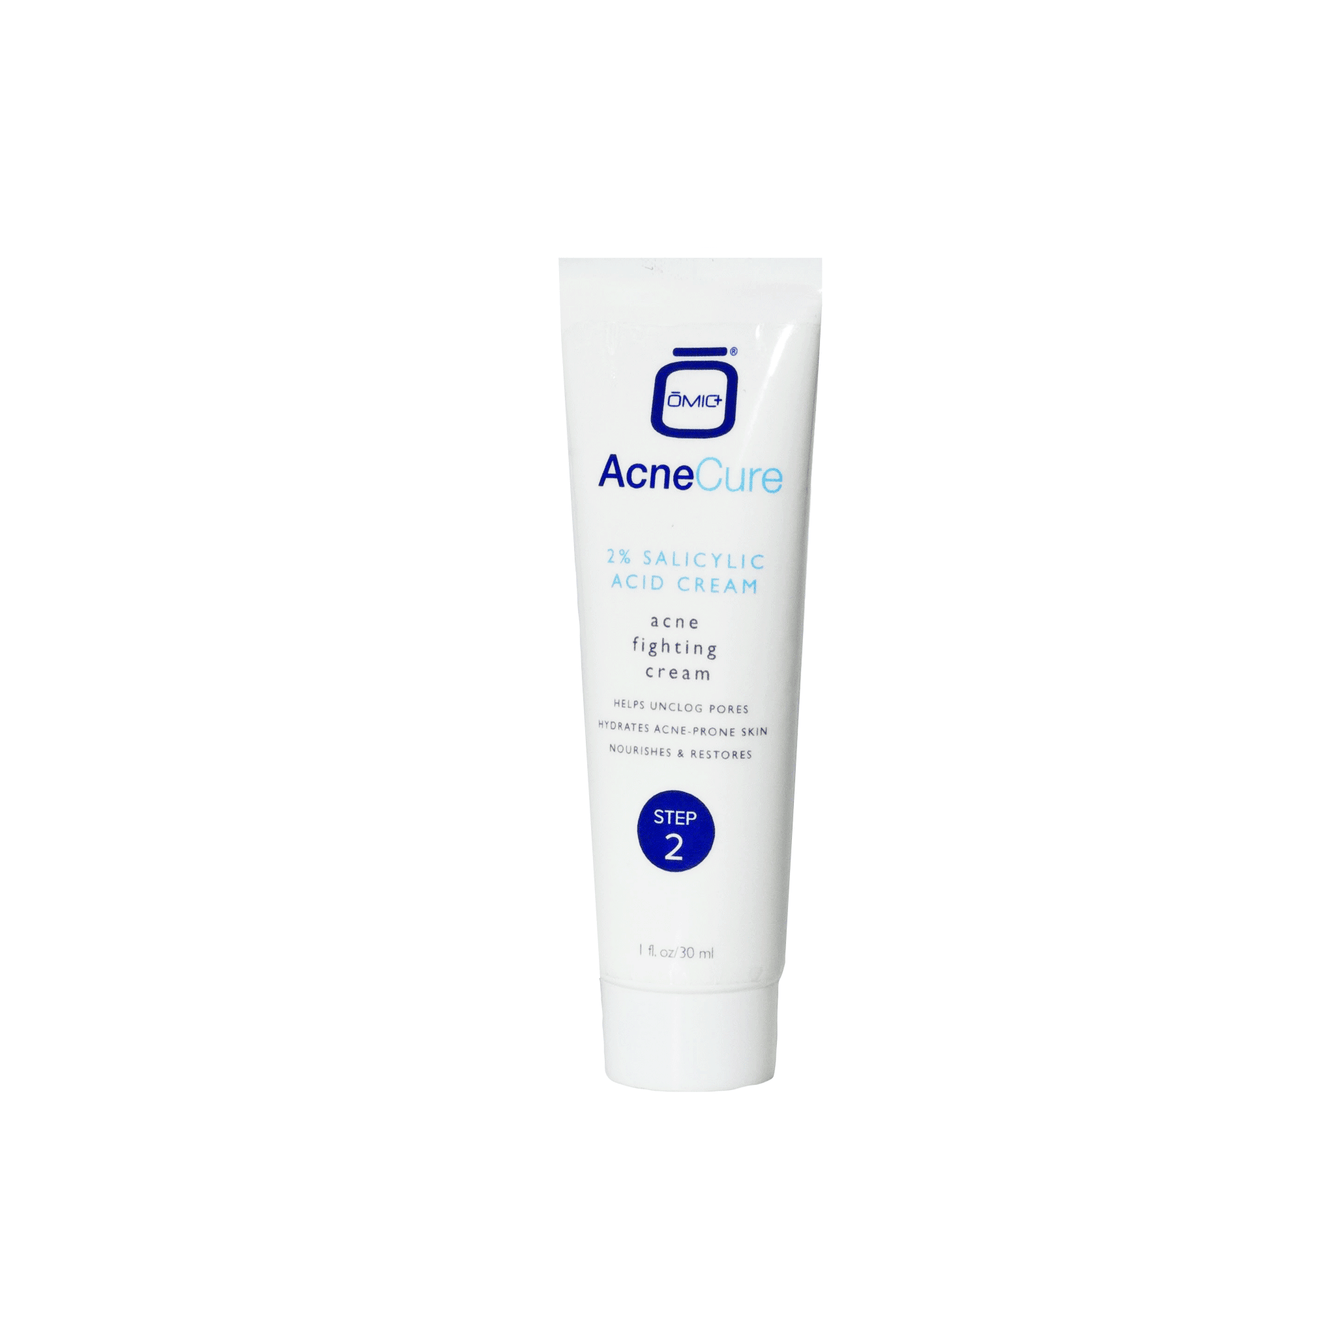 Omic+ AcneCure Cream 30ml Mitchell Group USA, LLC - Mitchell Brands - Skin Lightening, Skin Brightening, Fade Dark Spots, Shea Butter, Hair Growth Products